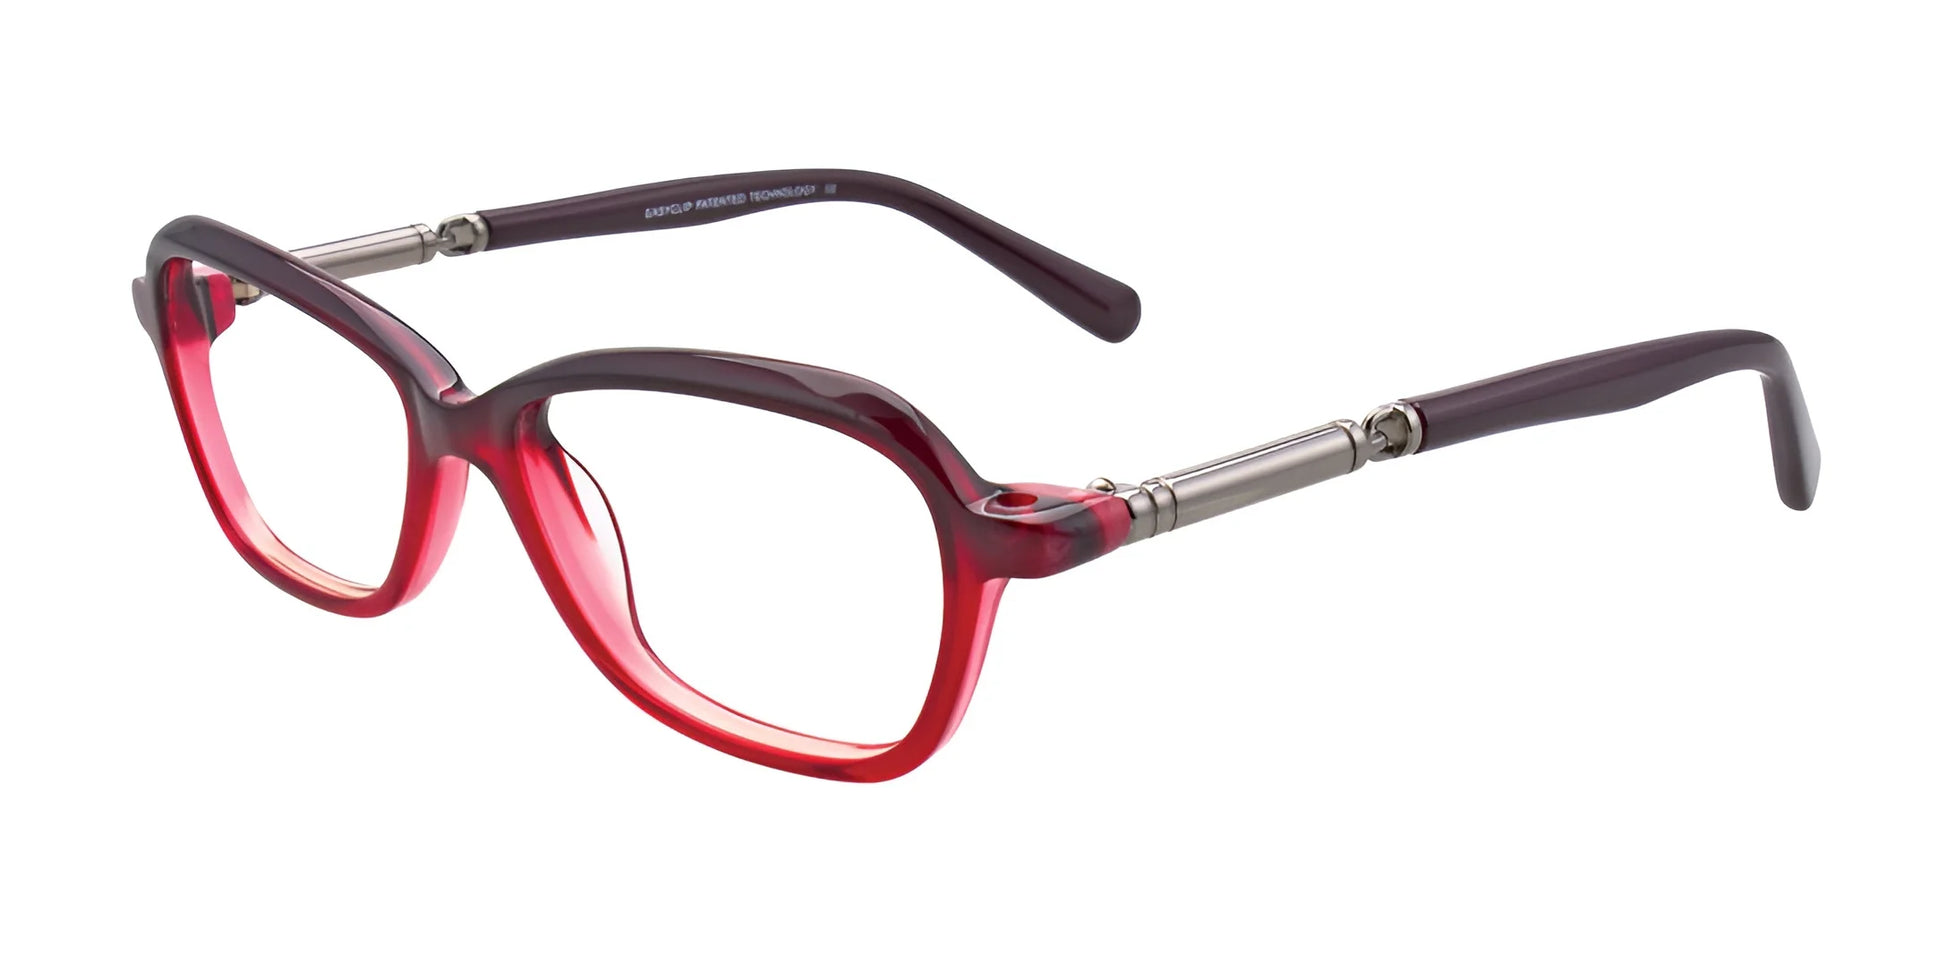 EasyClip EC336 Eyeglasses with Clip-on Sunglasses Gradient Red